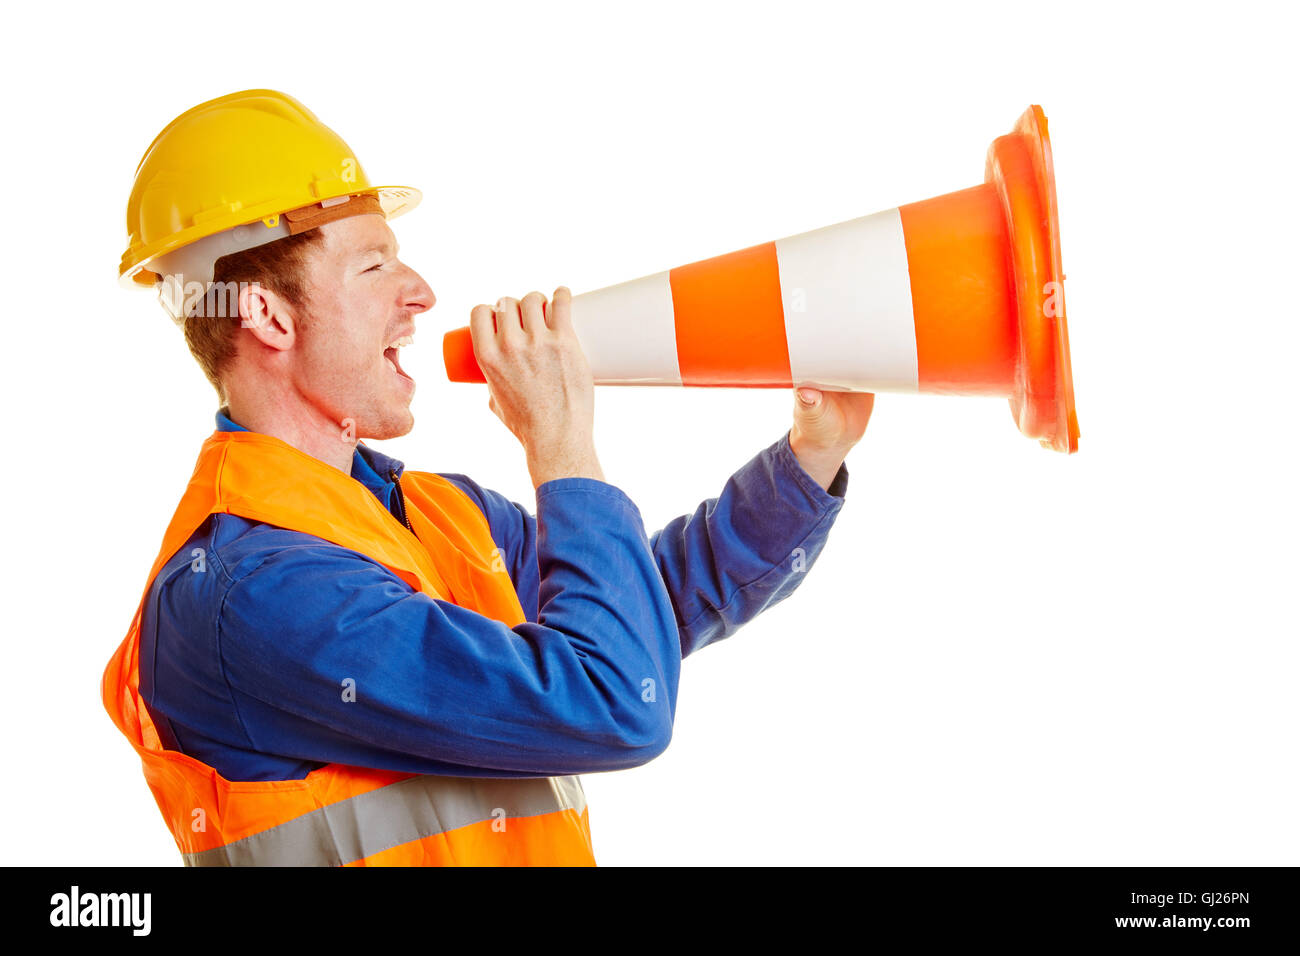 Construction worker yelling with a traffic cone and a safety vest Stock Photo